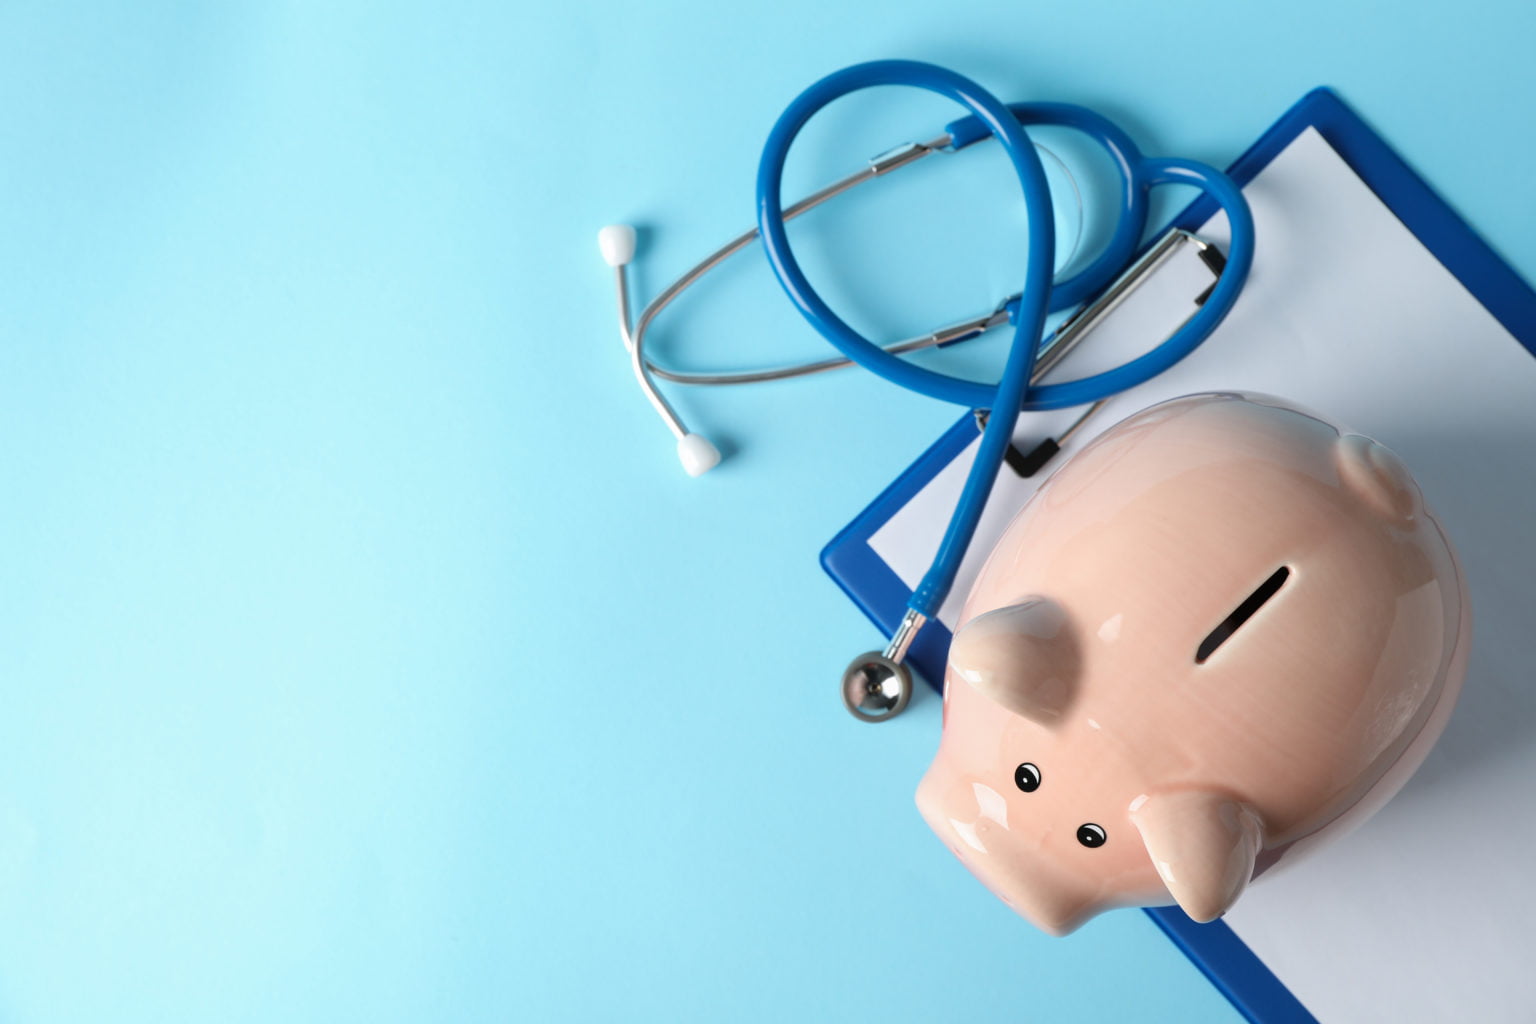 Stethoscope and piggy bank on blue background